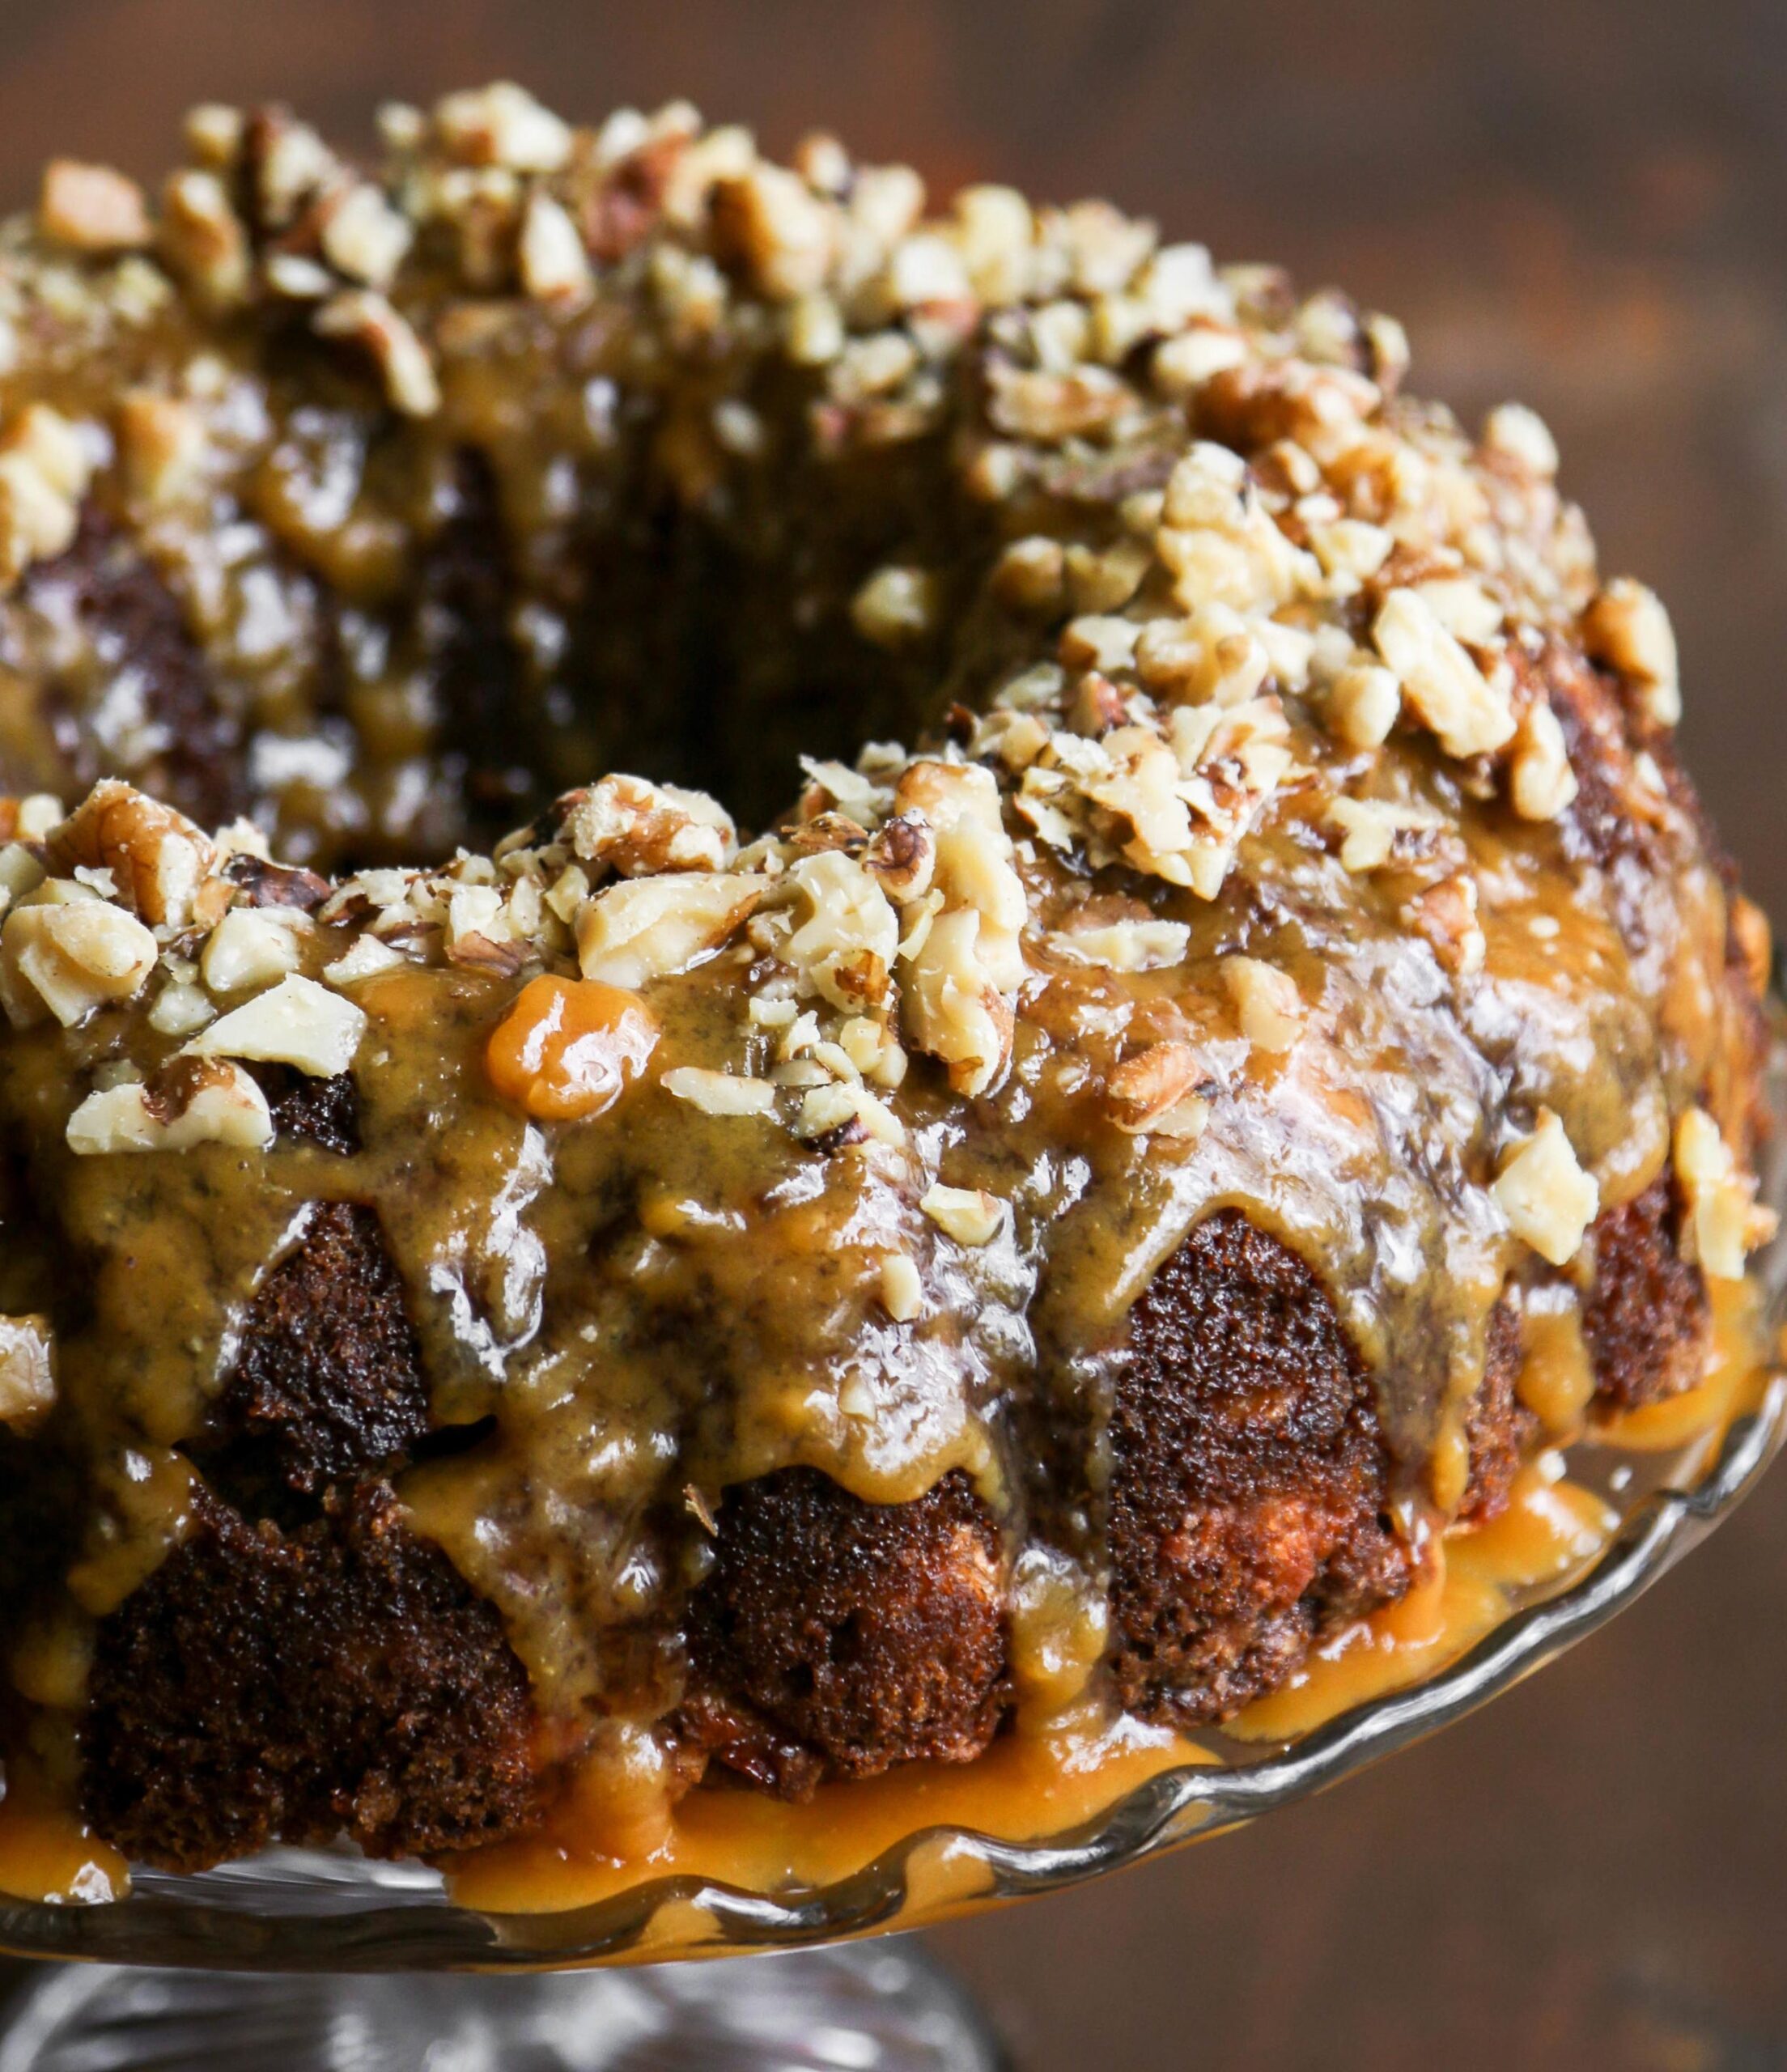  Walnuts give this cake the crunch you've been craving.